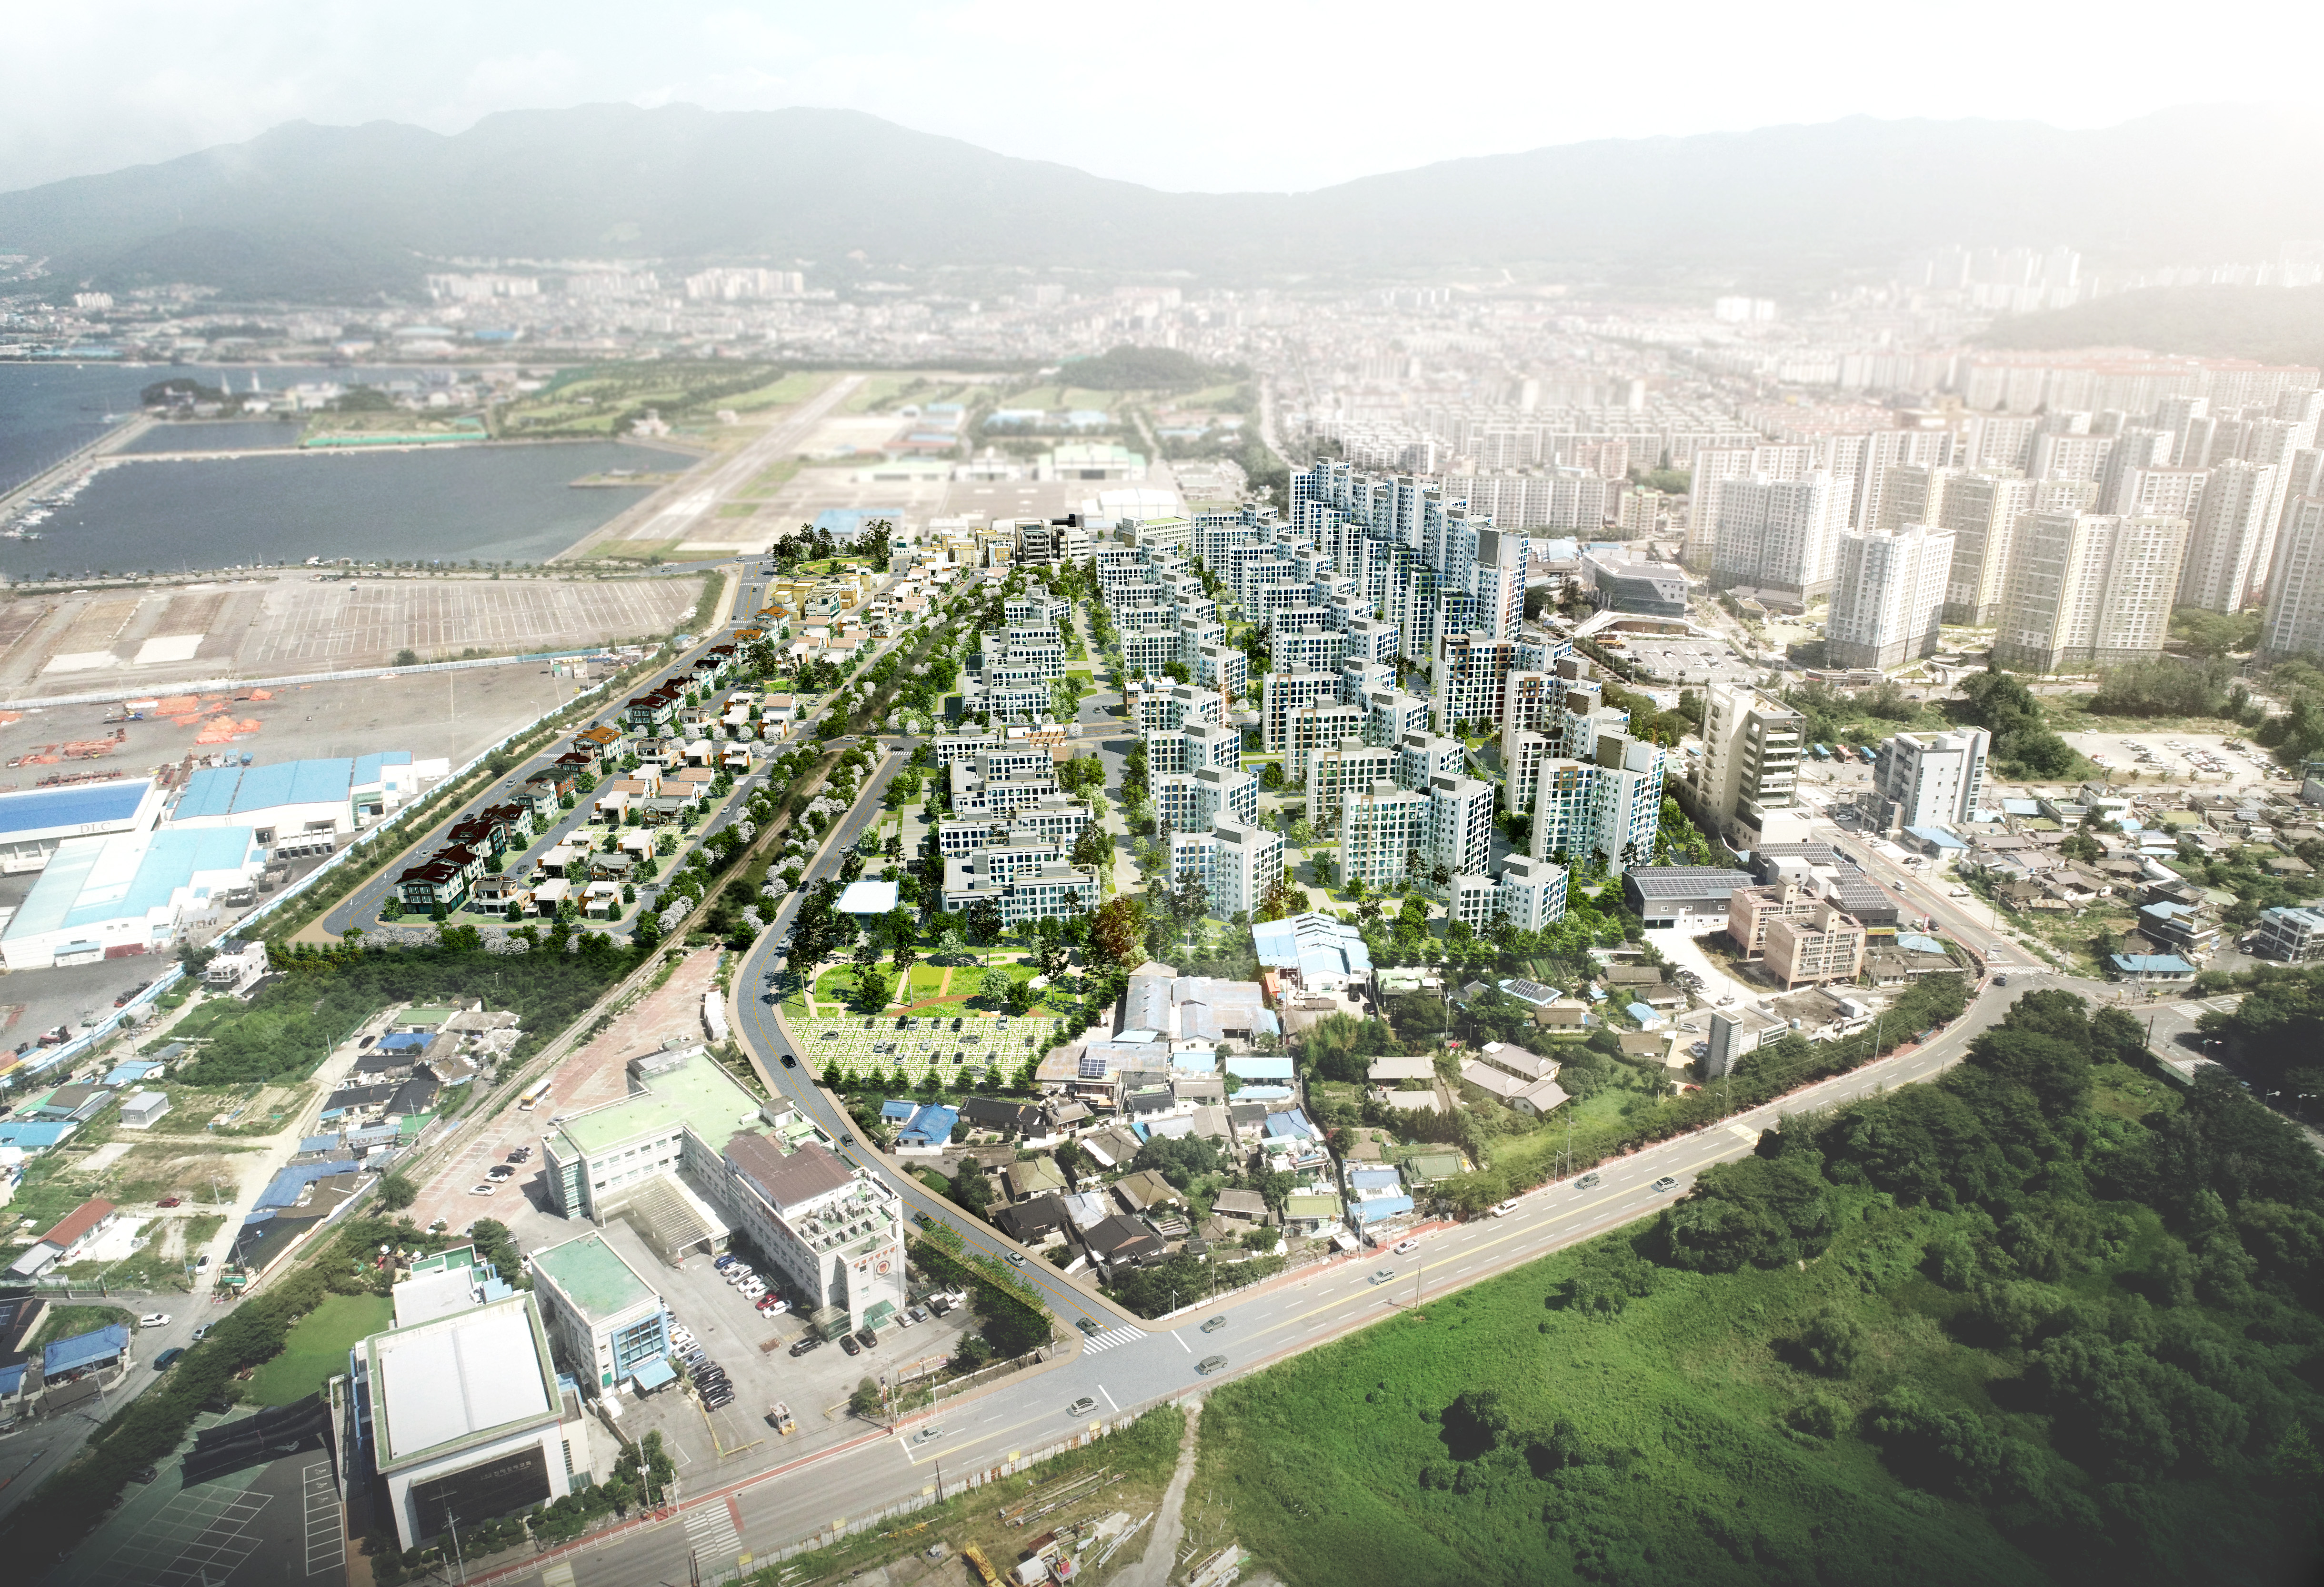 Changwon Pungho Jangcheon District urban development project zone designation and planning service